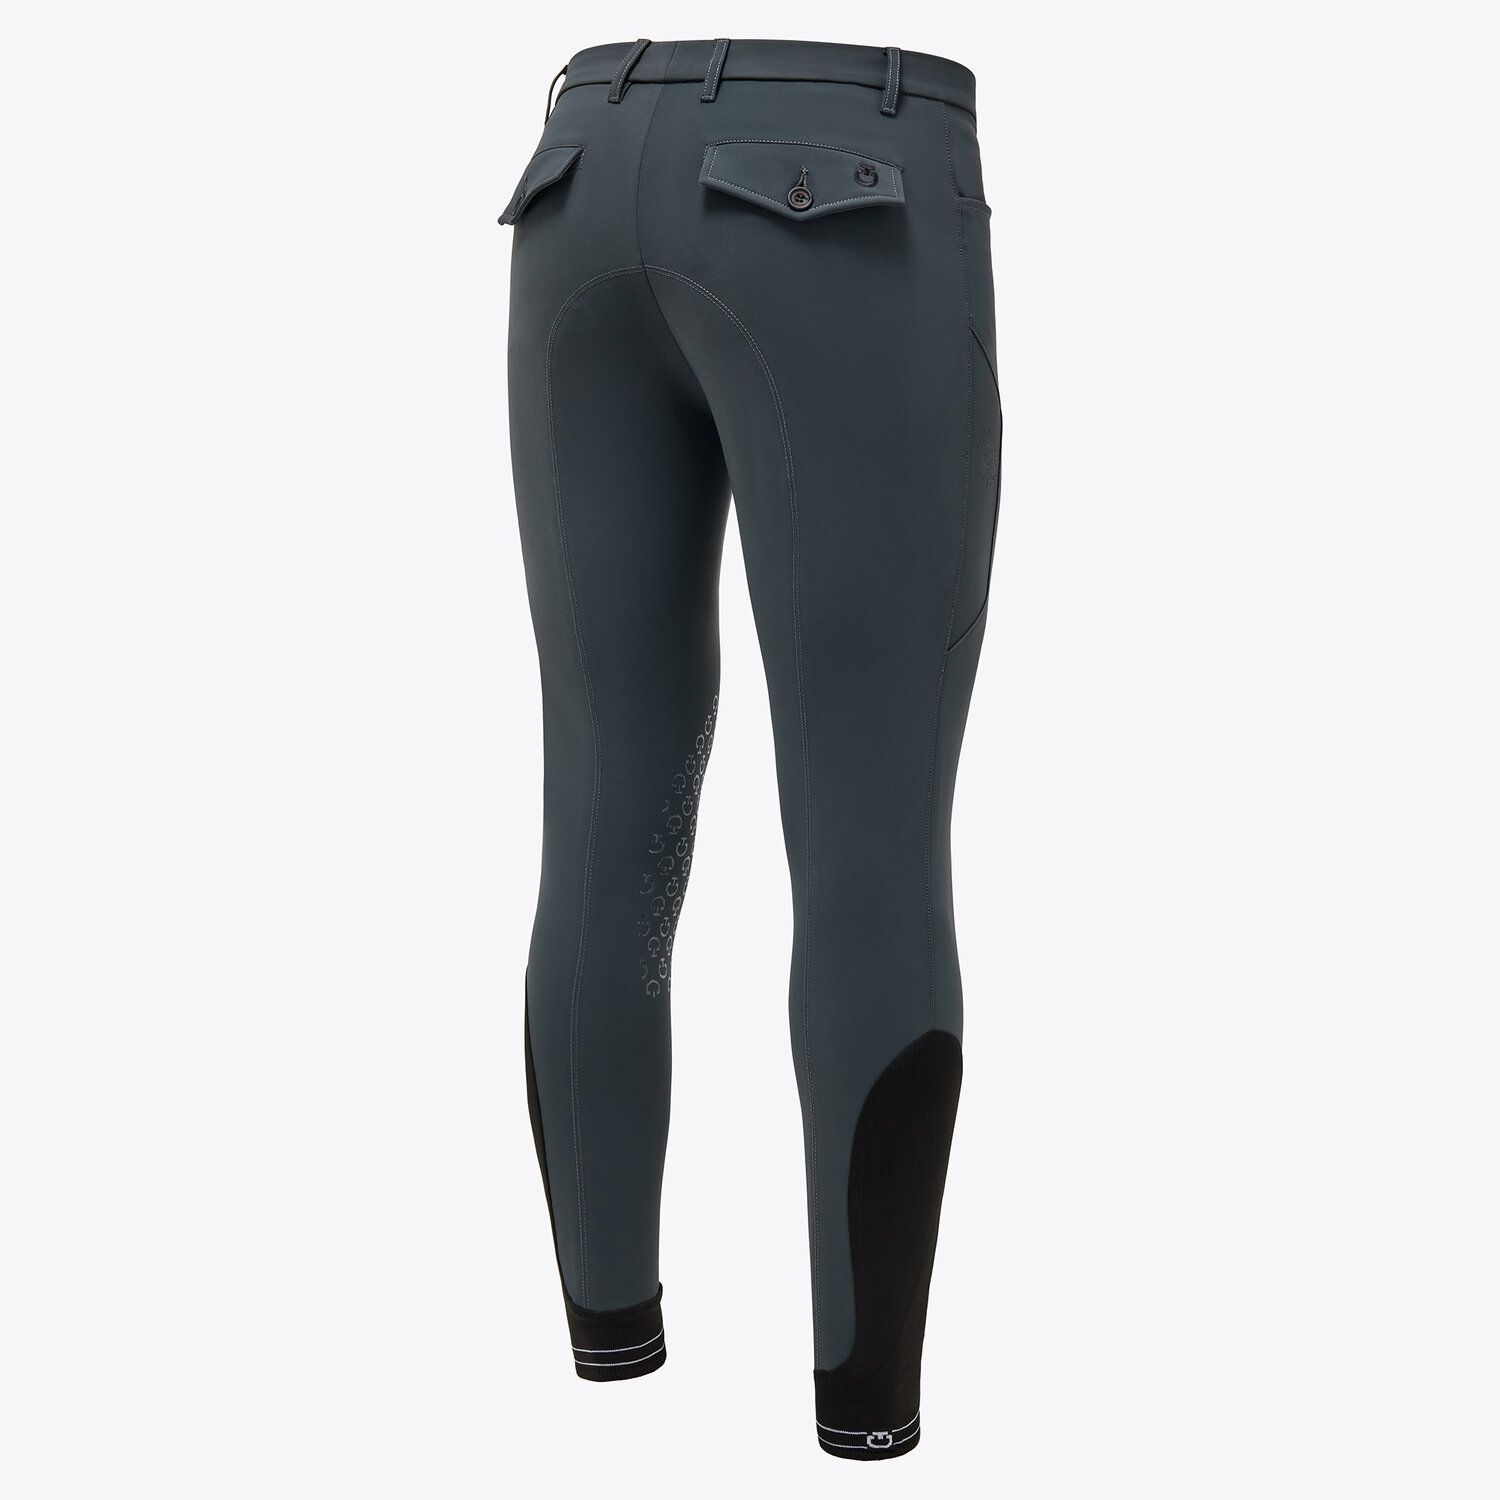 Cavalleria Toscana Men’s four-way stretch performance riding breeches CHARCOAL GREY-2